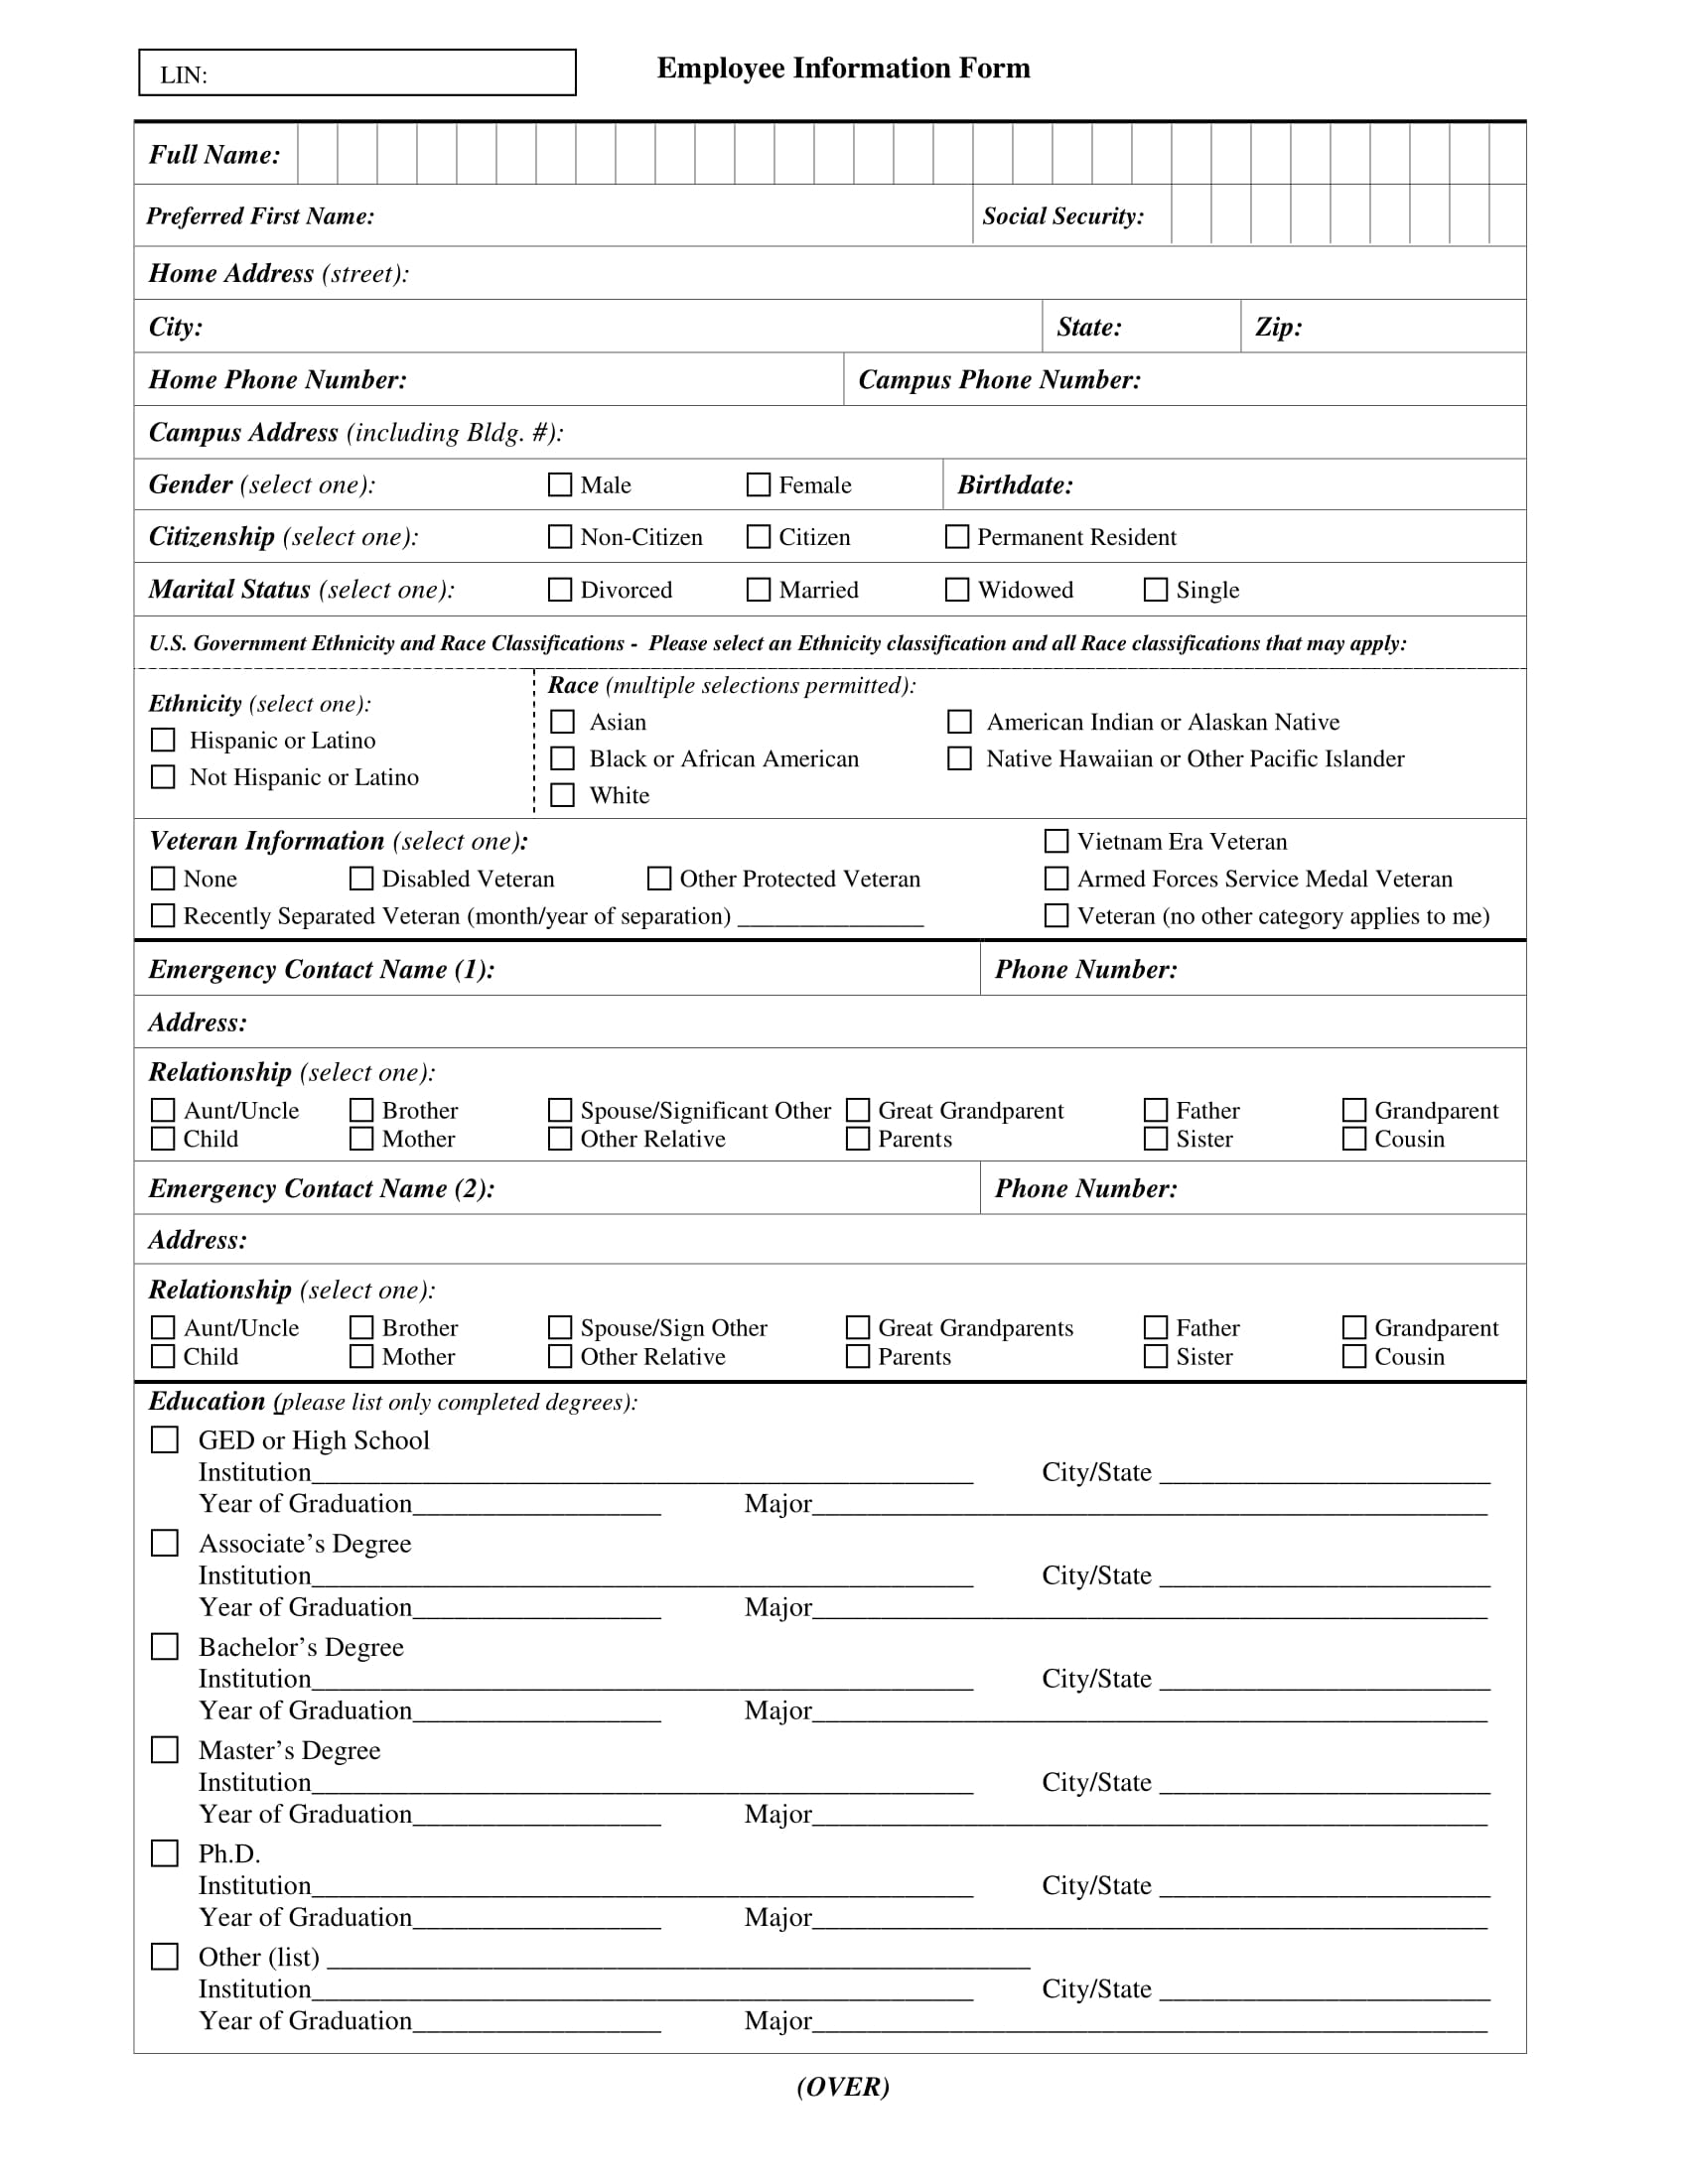 detailed employee information form 1